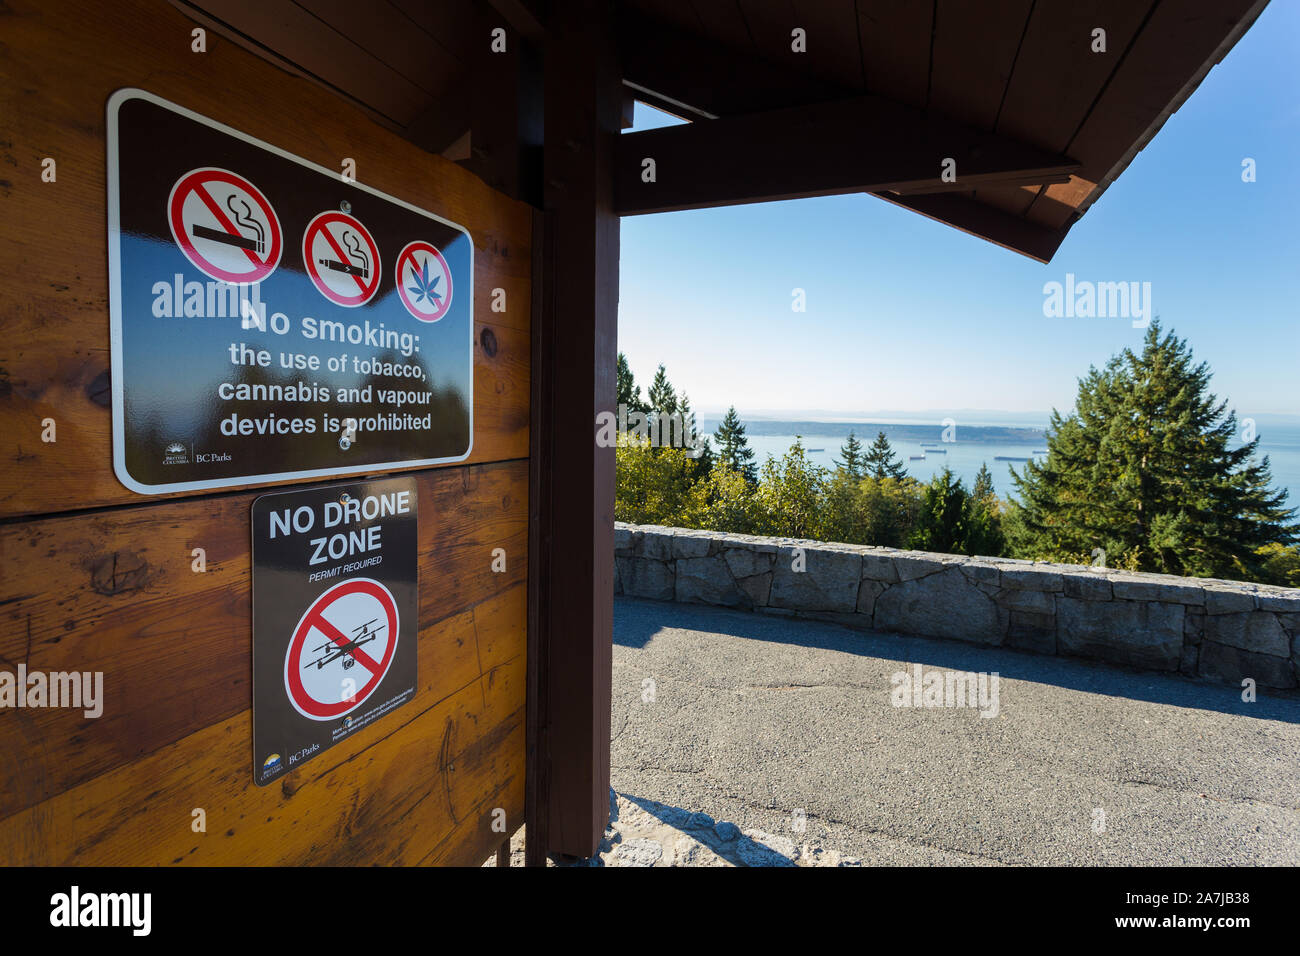 VANCOUVER, BC, CANADA - OCT 10, 2019: A sign indicating the restriction of cannabis products and cigarettes as well as the prohibition of the use of Stock Photo